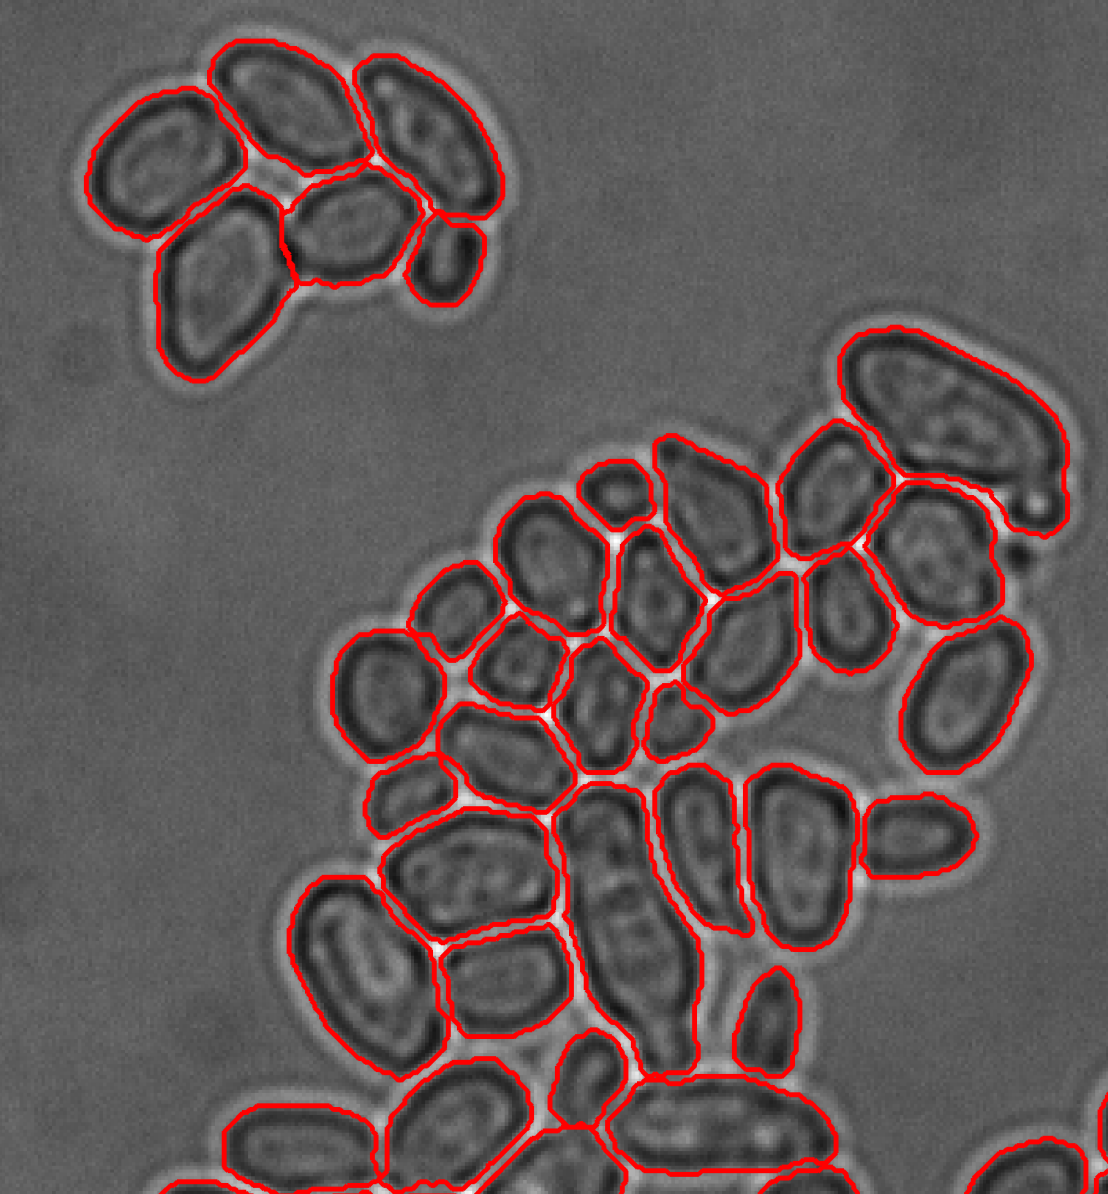 Enlarged view: Image segmentation for yeast cells.